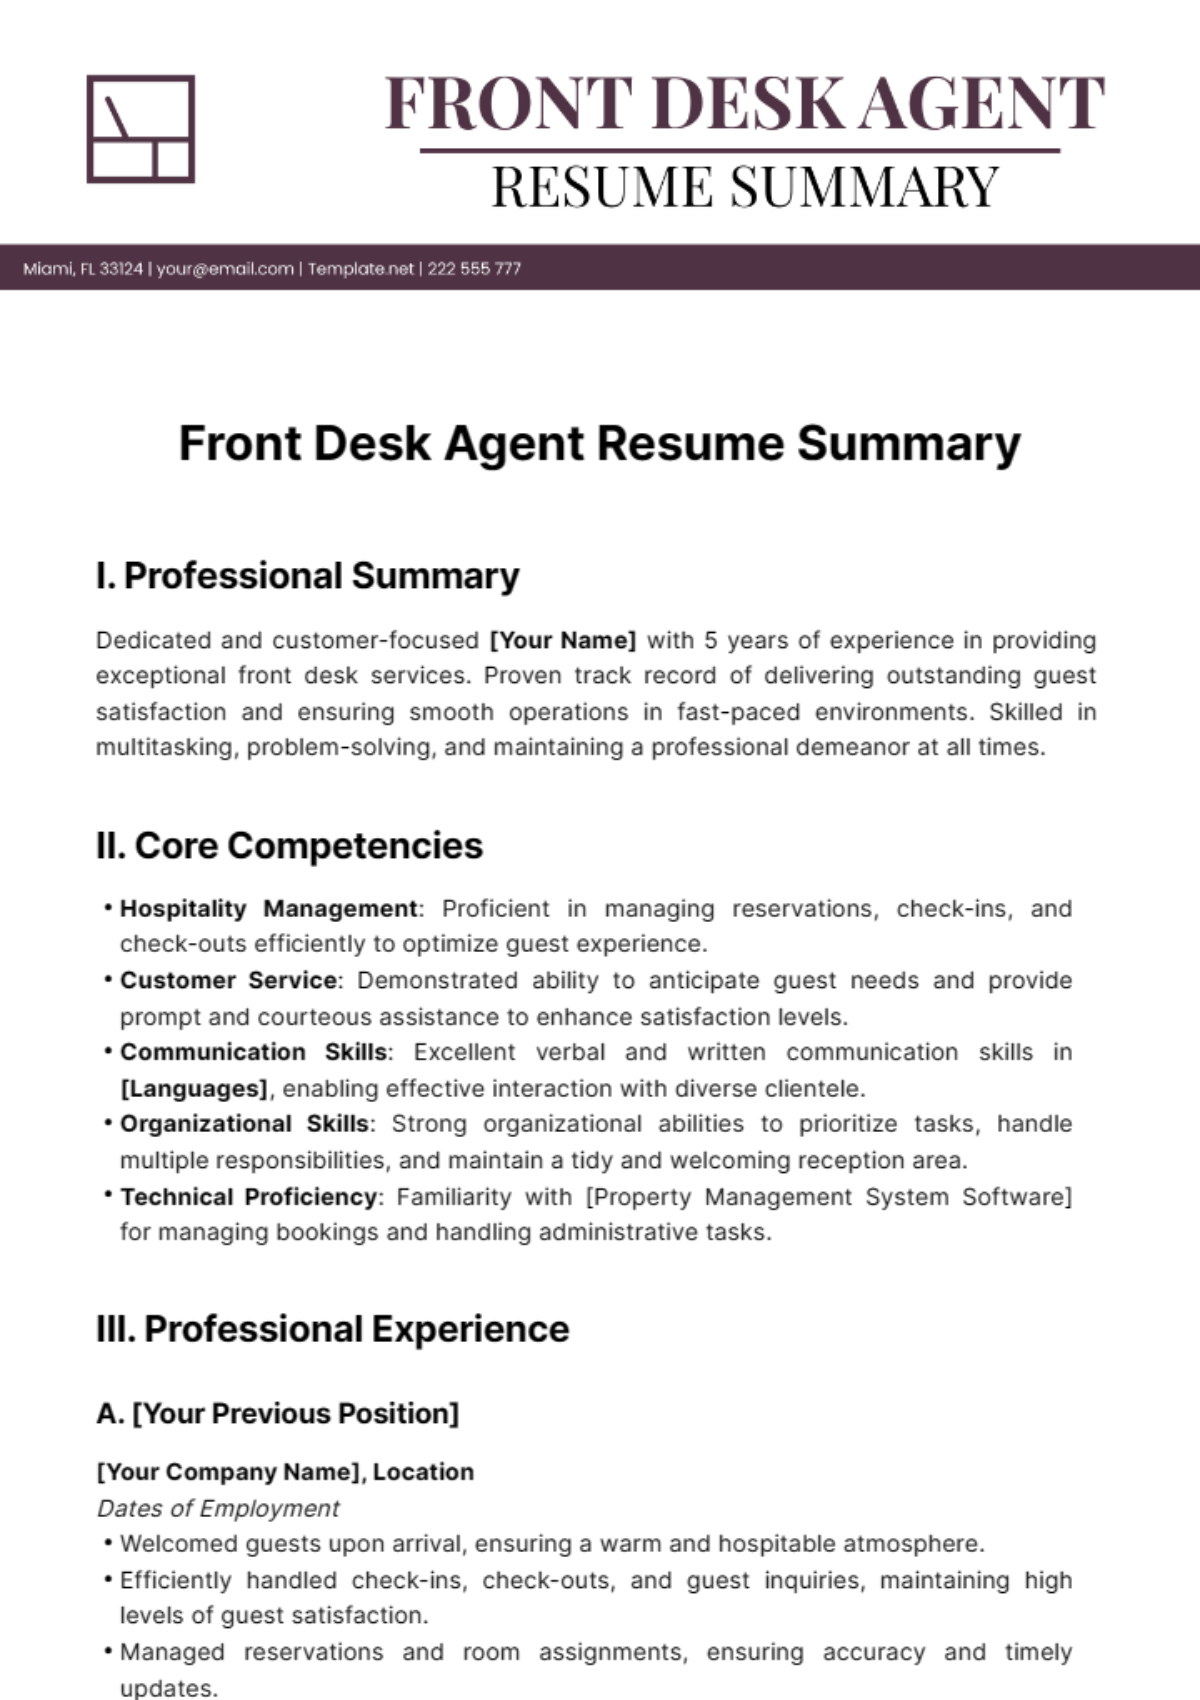 Free Front Desk Agent Resume Summary Template